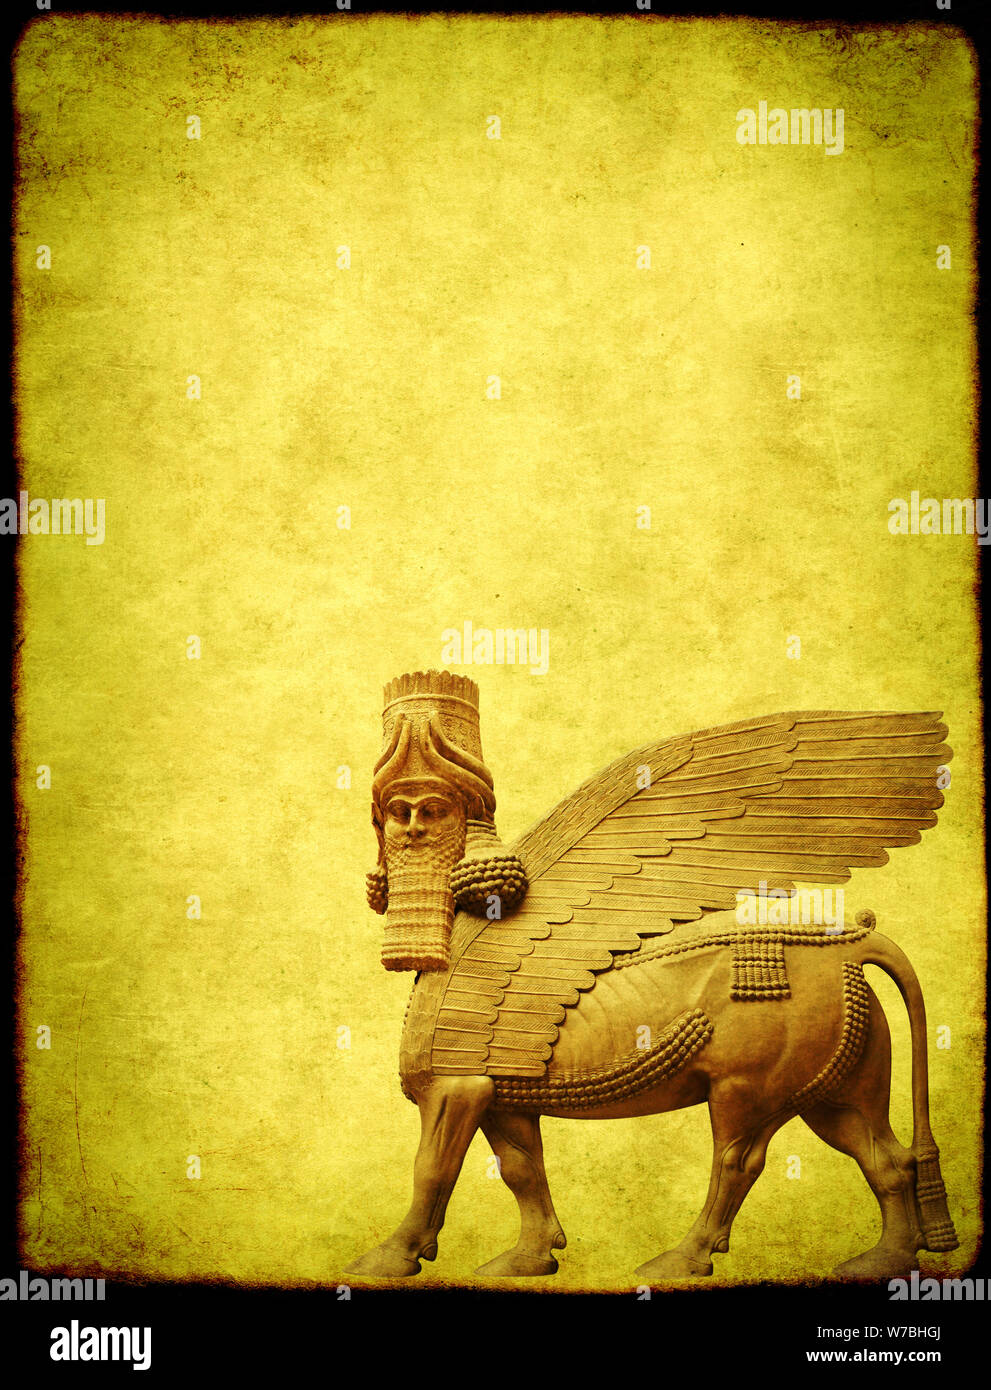 Grunge background with paper texture and lamassu - human-headed winged bull statue, Assyrian protective deity. Copy space for text. Mock up template Stock Photo